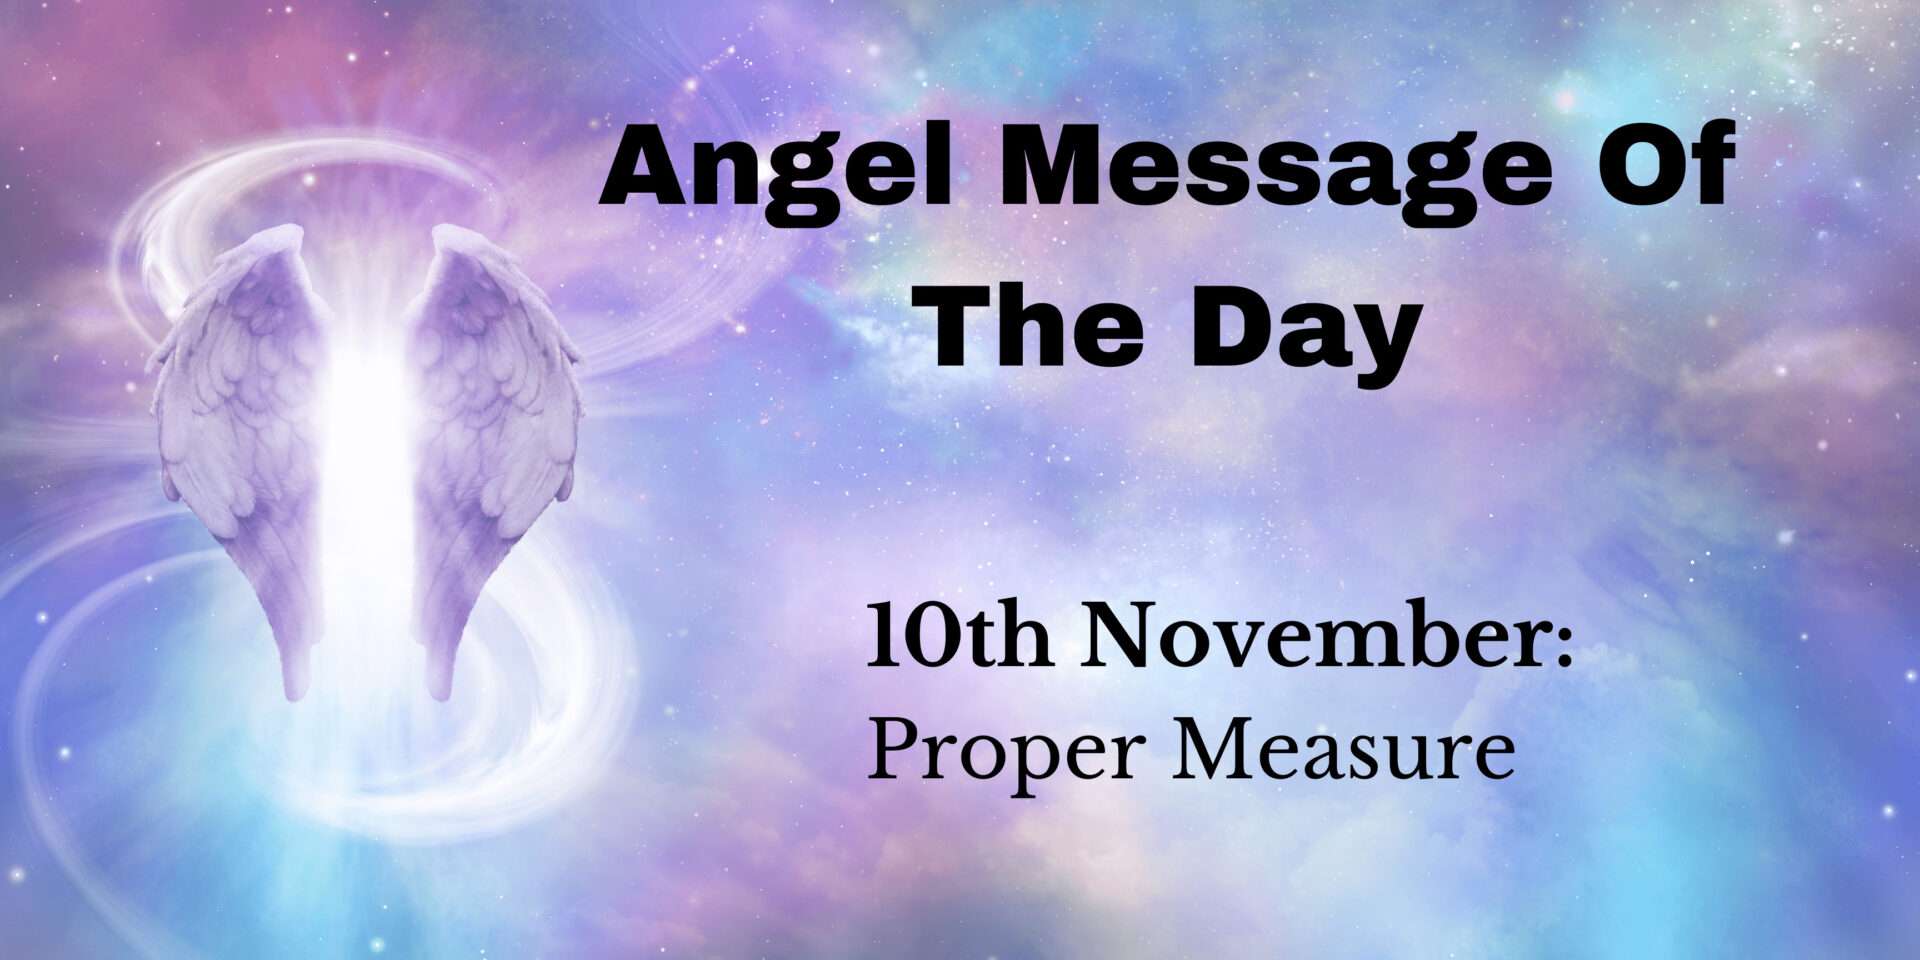 angel message of the day : proper measure